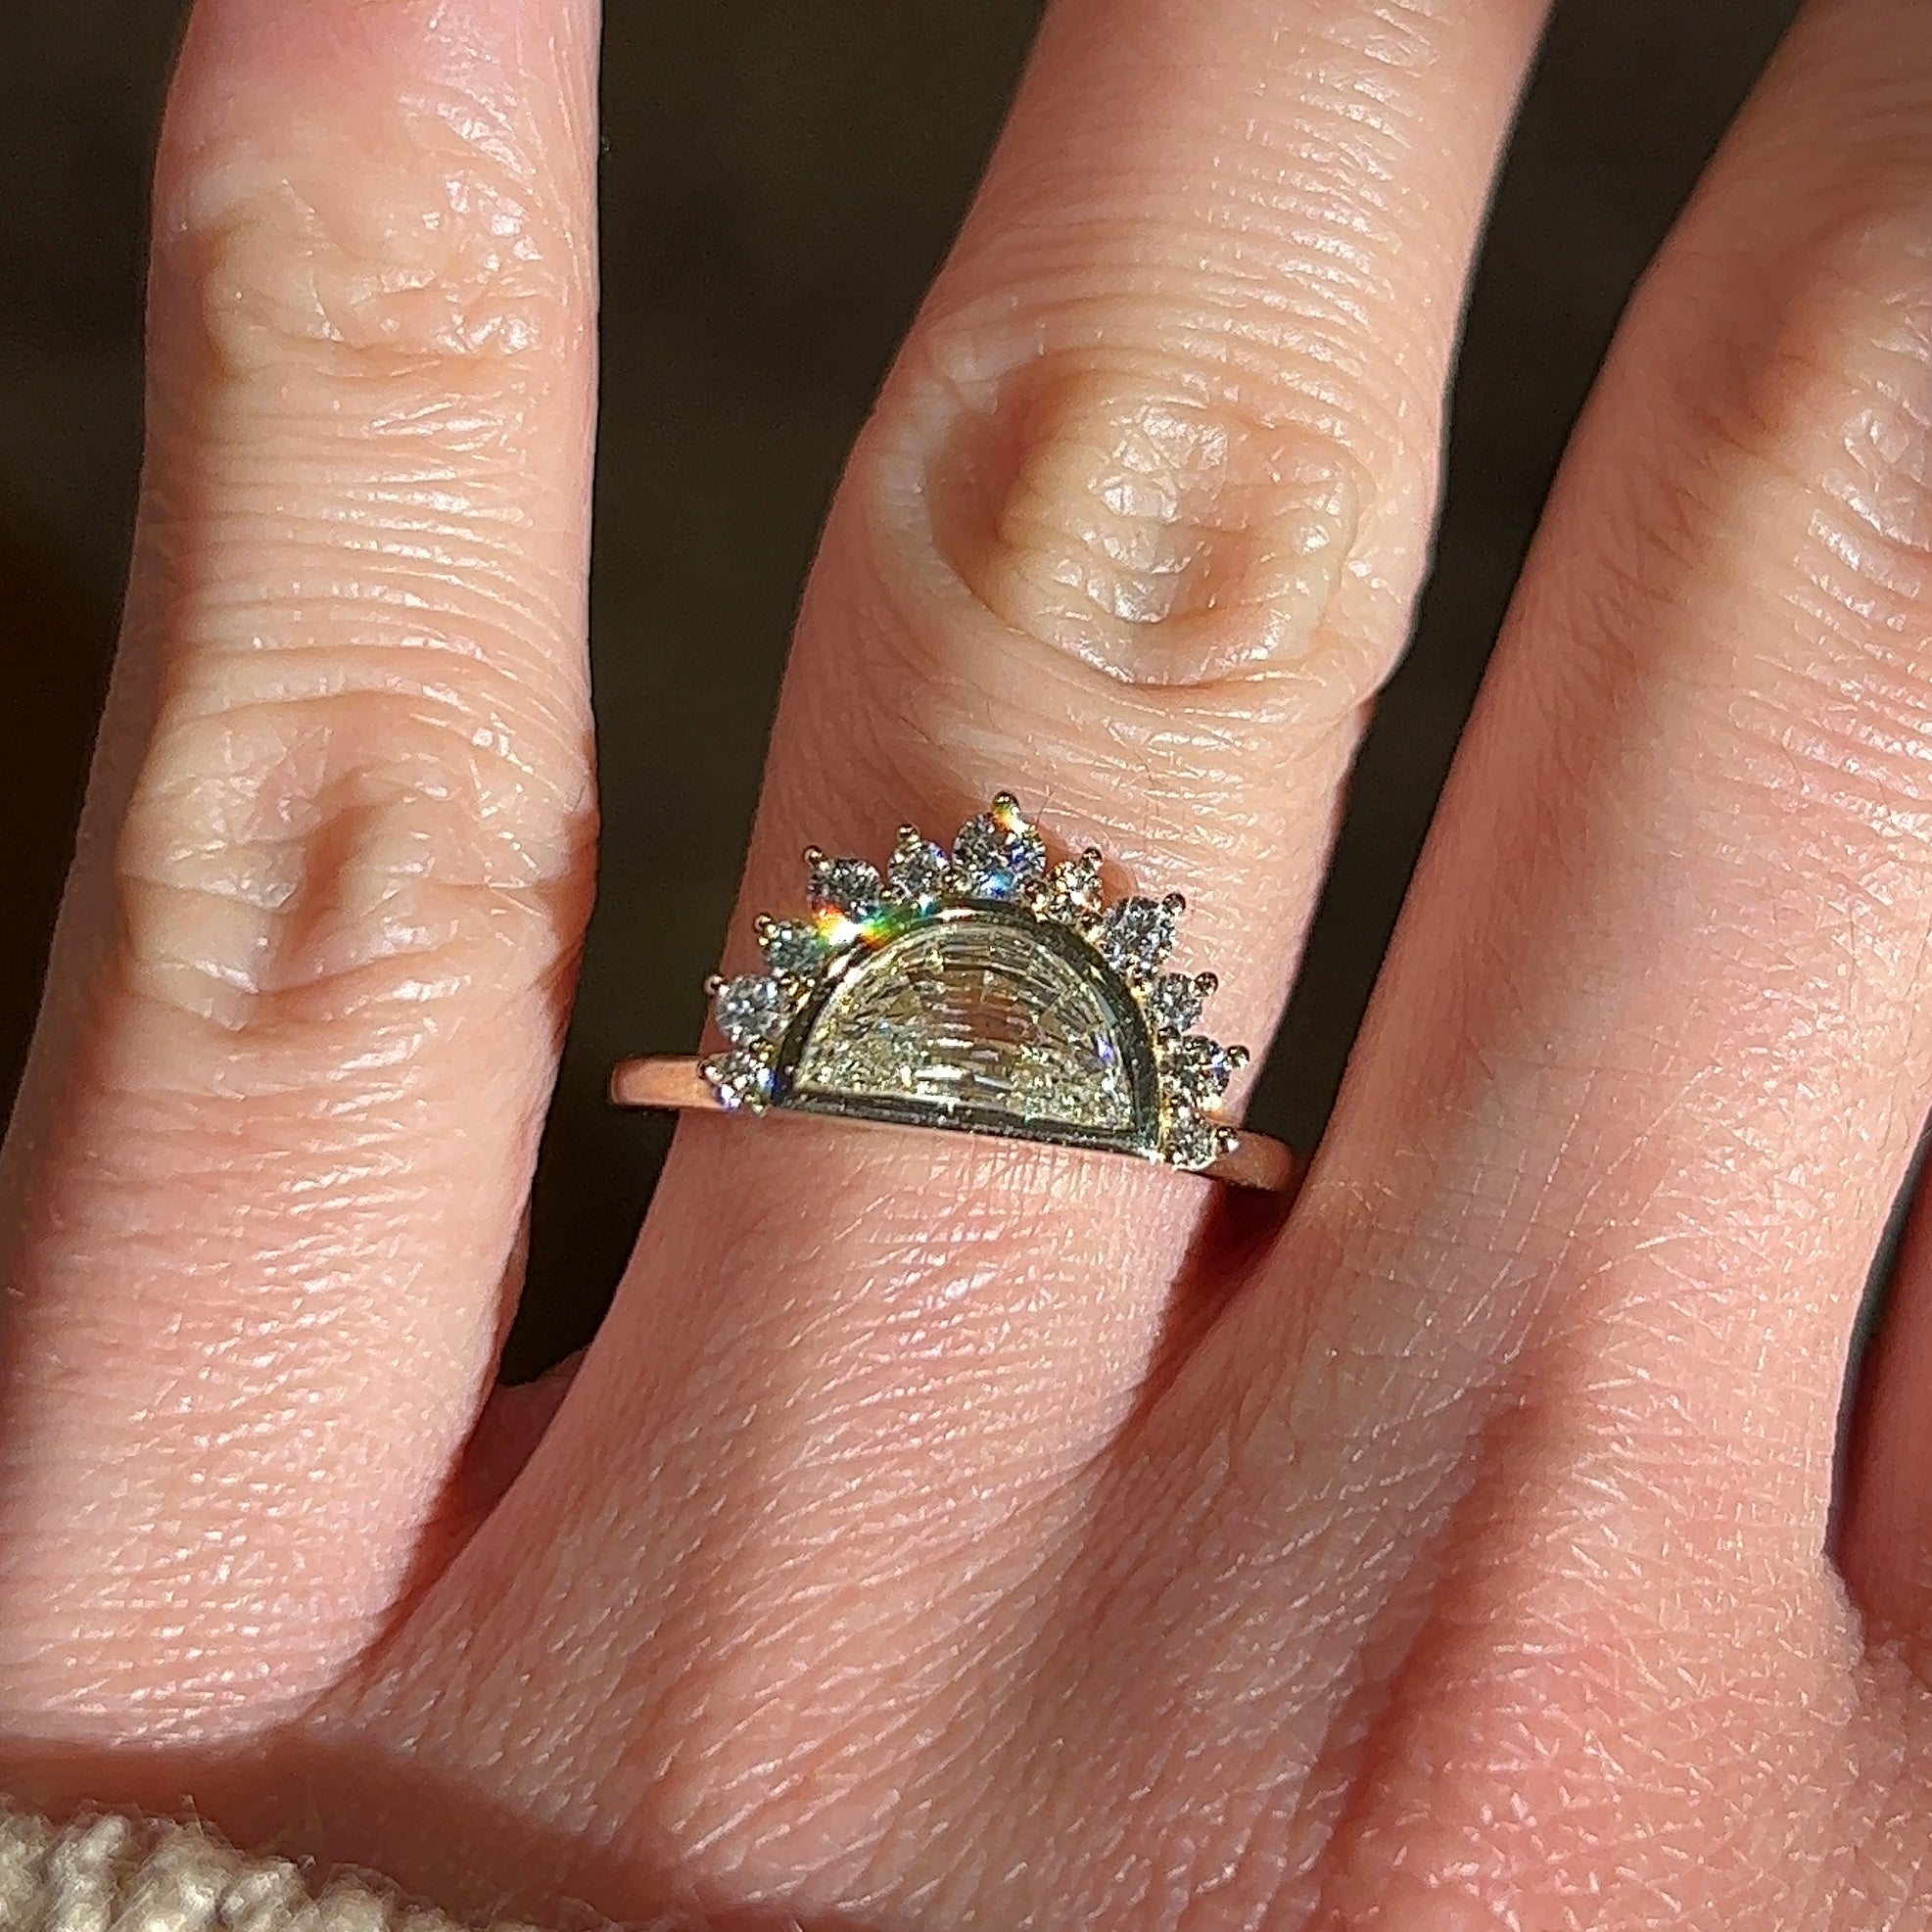 Video of a Half moon diamond engagement ring in a unique 14k yellow gold halo setting on a hand